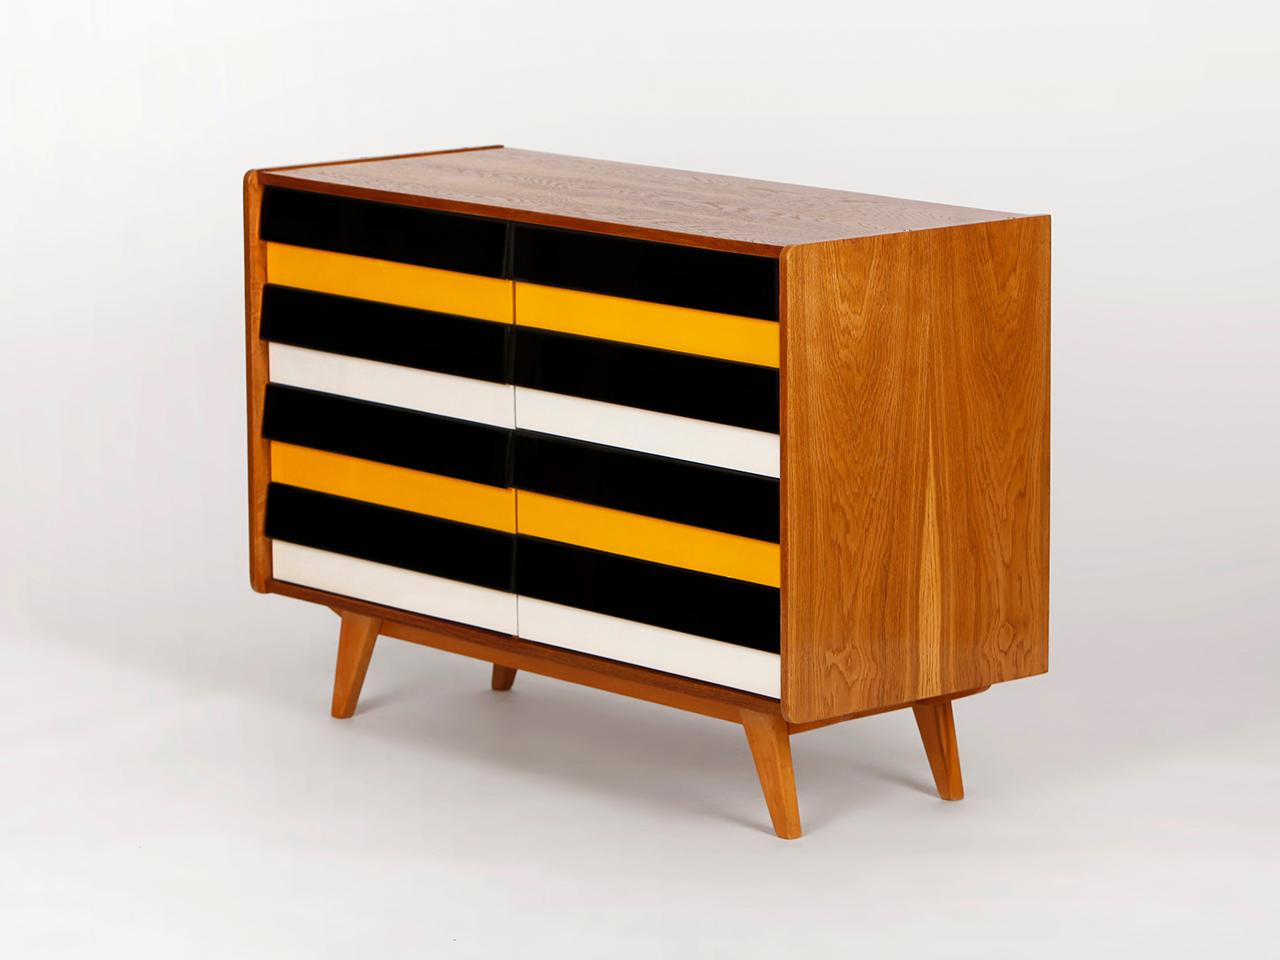 This model U-453 sideboard was designed by Jiri Jiroutek for Interier Praha in former Czechoslovakia. Produced in the 1960s. 
Completely restored. Excellent condition. It is an early model with wooden drawers.